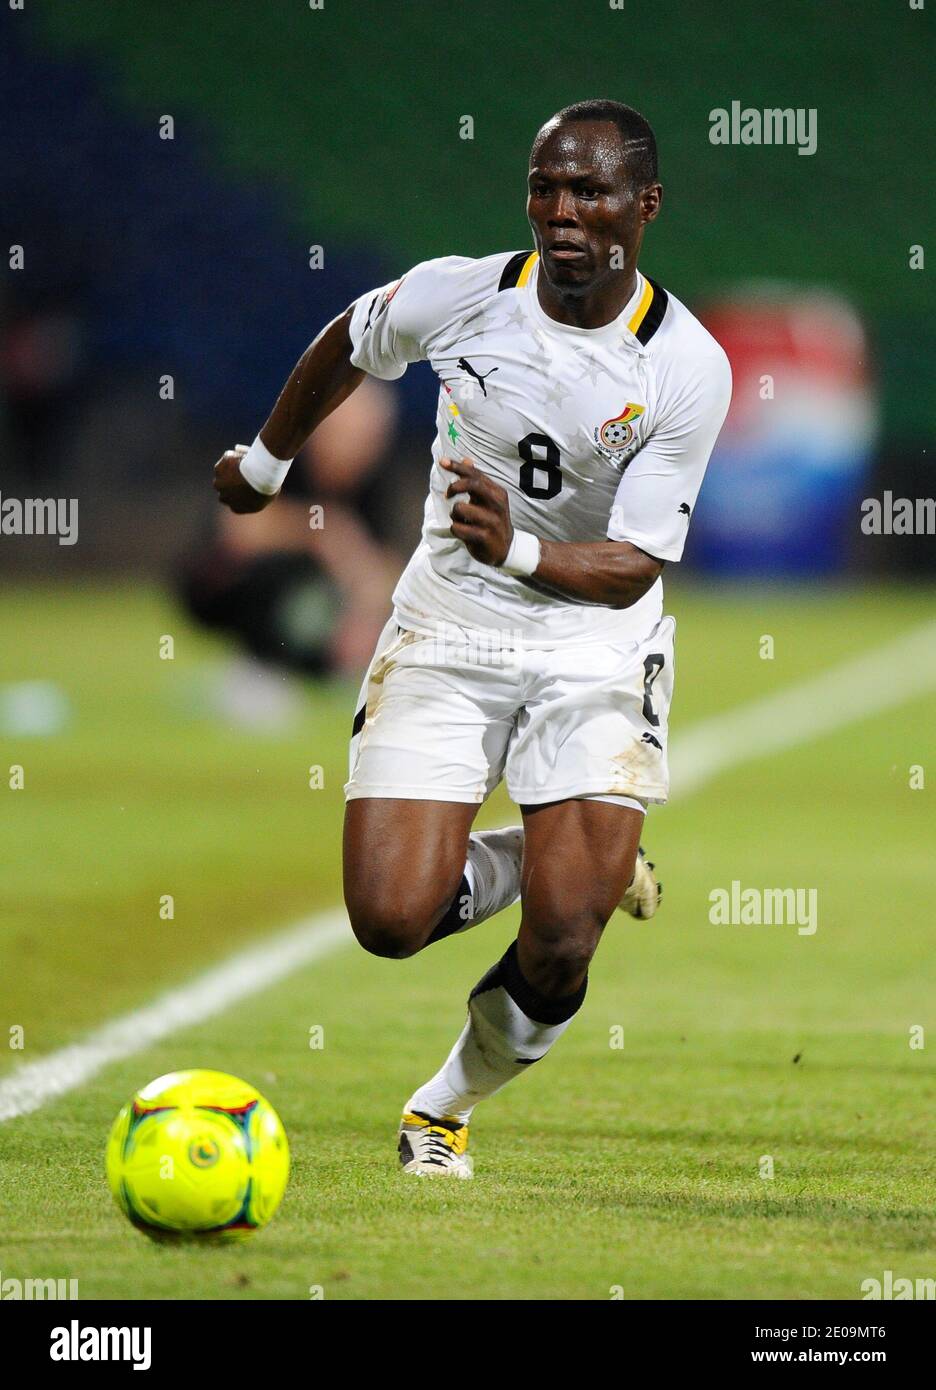 Ghana's Emmanuel Badu Agyemang during the 2012 African Cup of Nations soccer match, Ghana Vs Equatorial Guinea in Franceville, Gabon on February 2, 2012. The match ended in a 1-1 draw. Photo by ABACAPRESS.COM Stock Photo